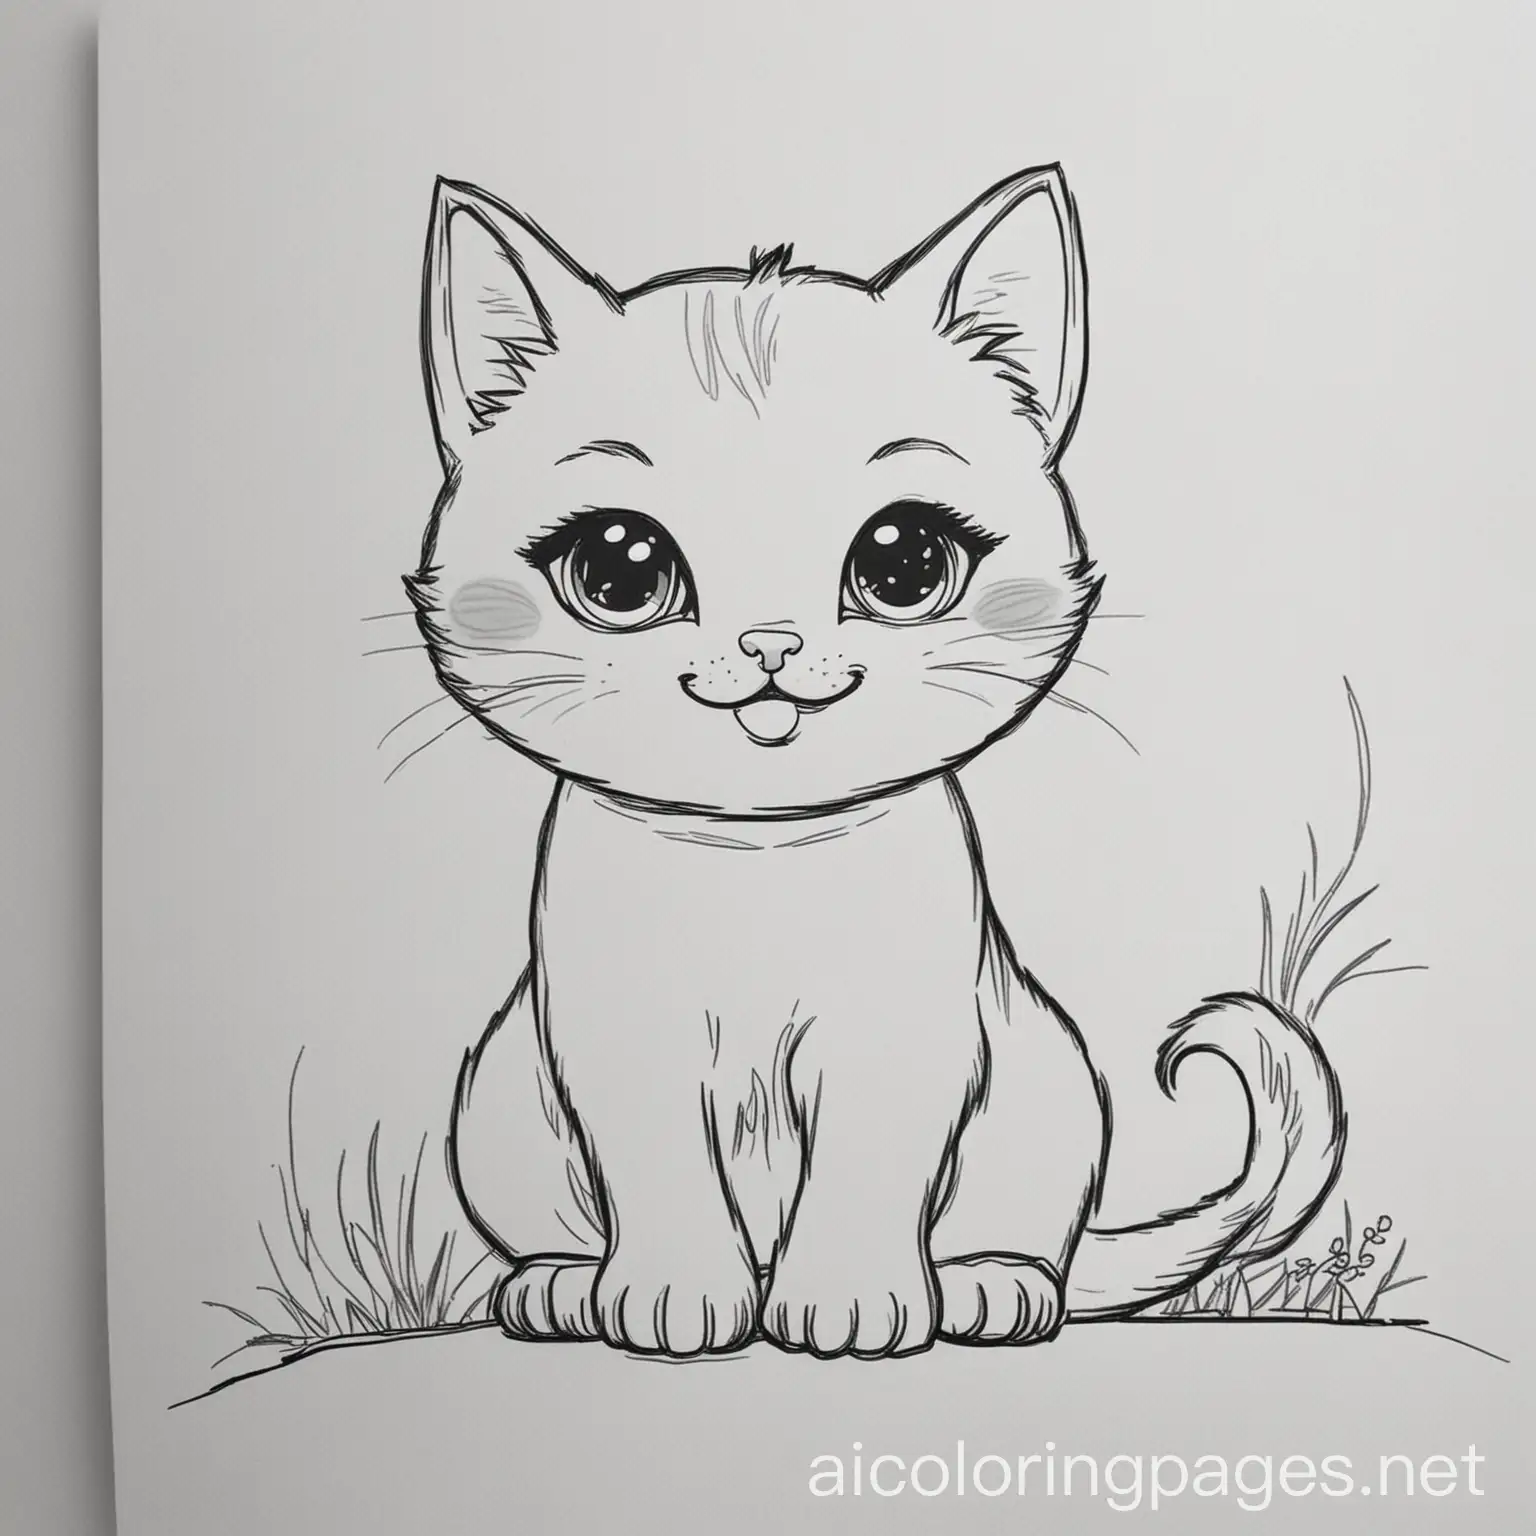 Simple-Baby-Cat-Coloring-Page-with-Ample-White-Space